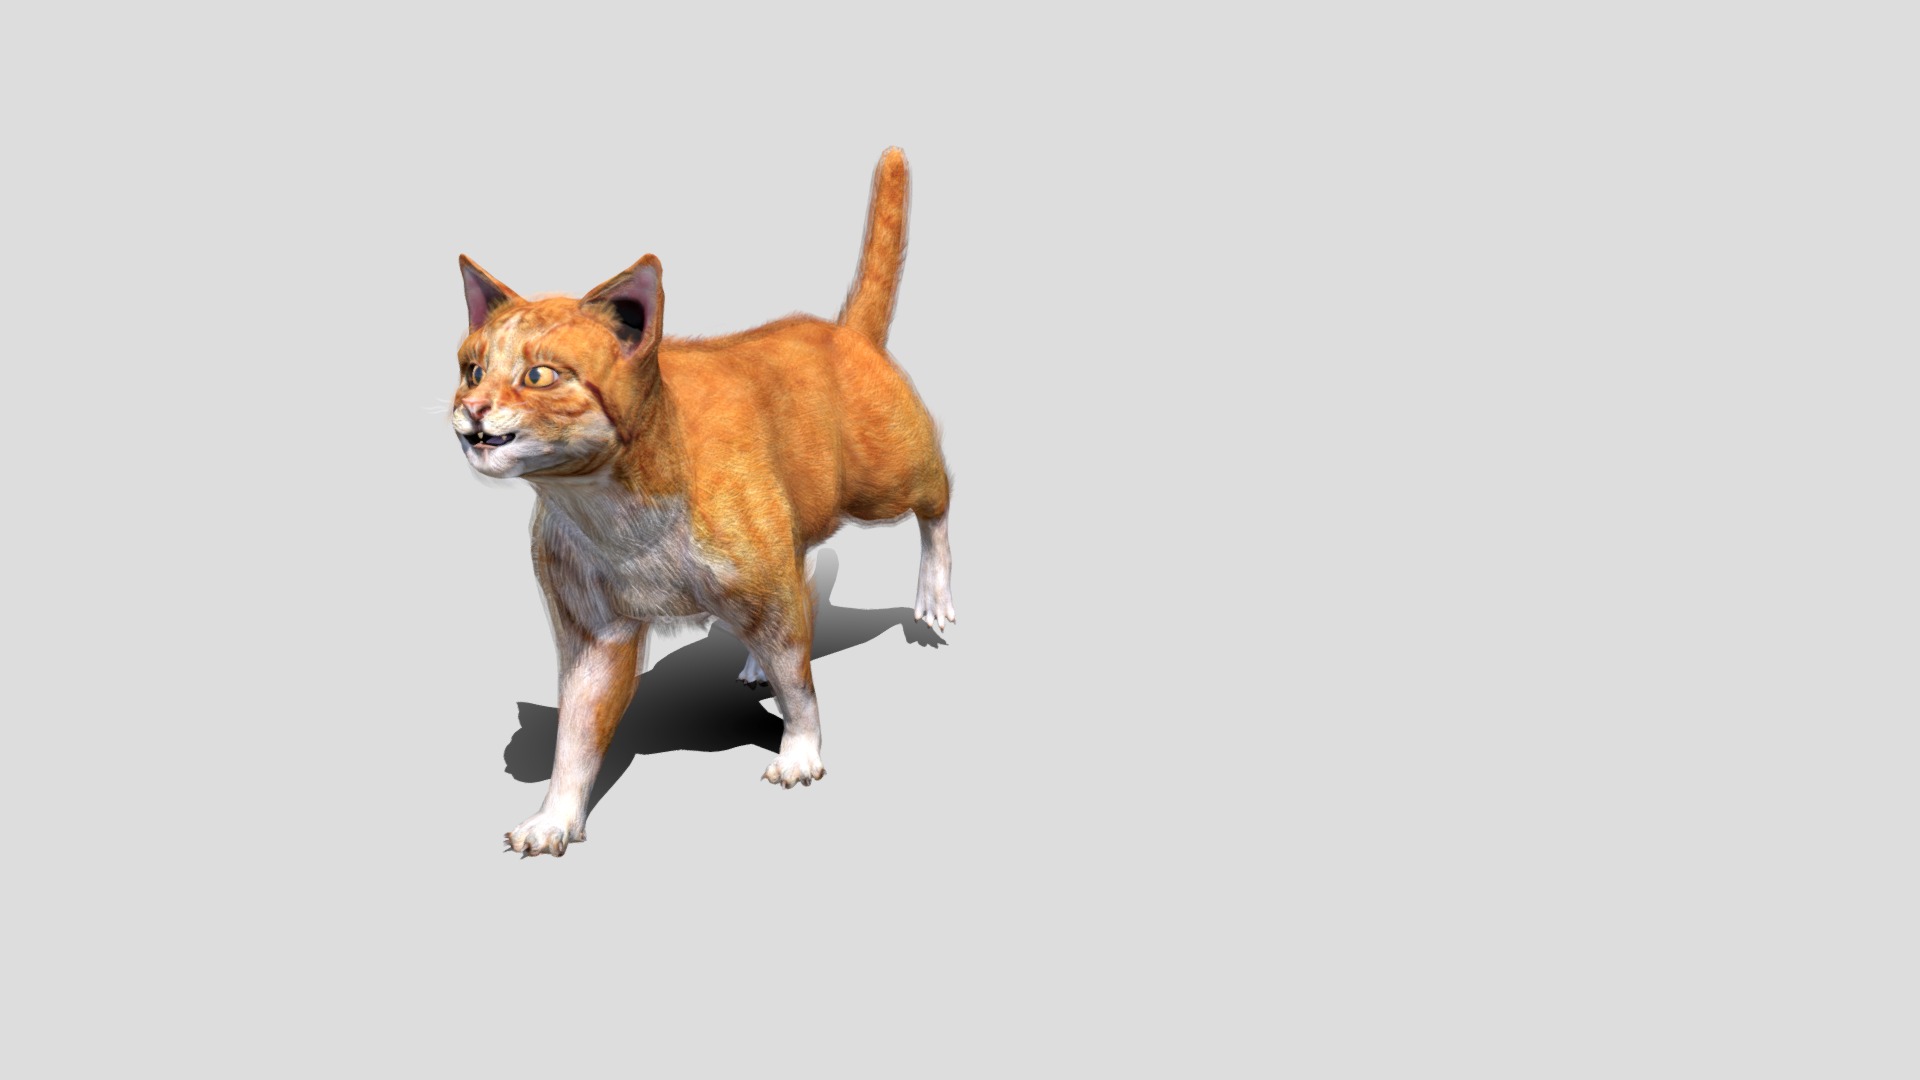 3D model Furry cat with animations - This is a 3D model of the Furry cat with animations. The 3D model is about a cat running on a white background.